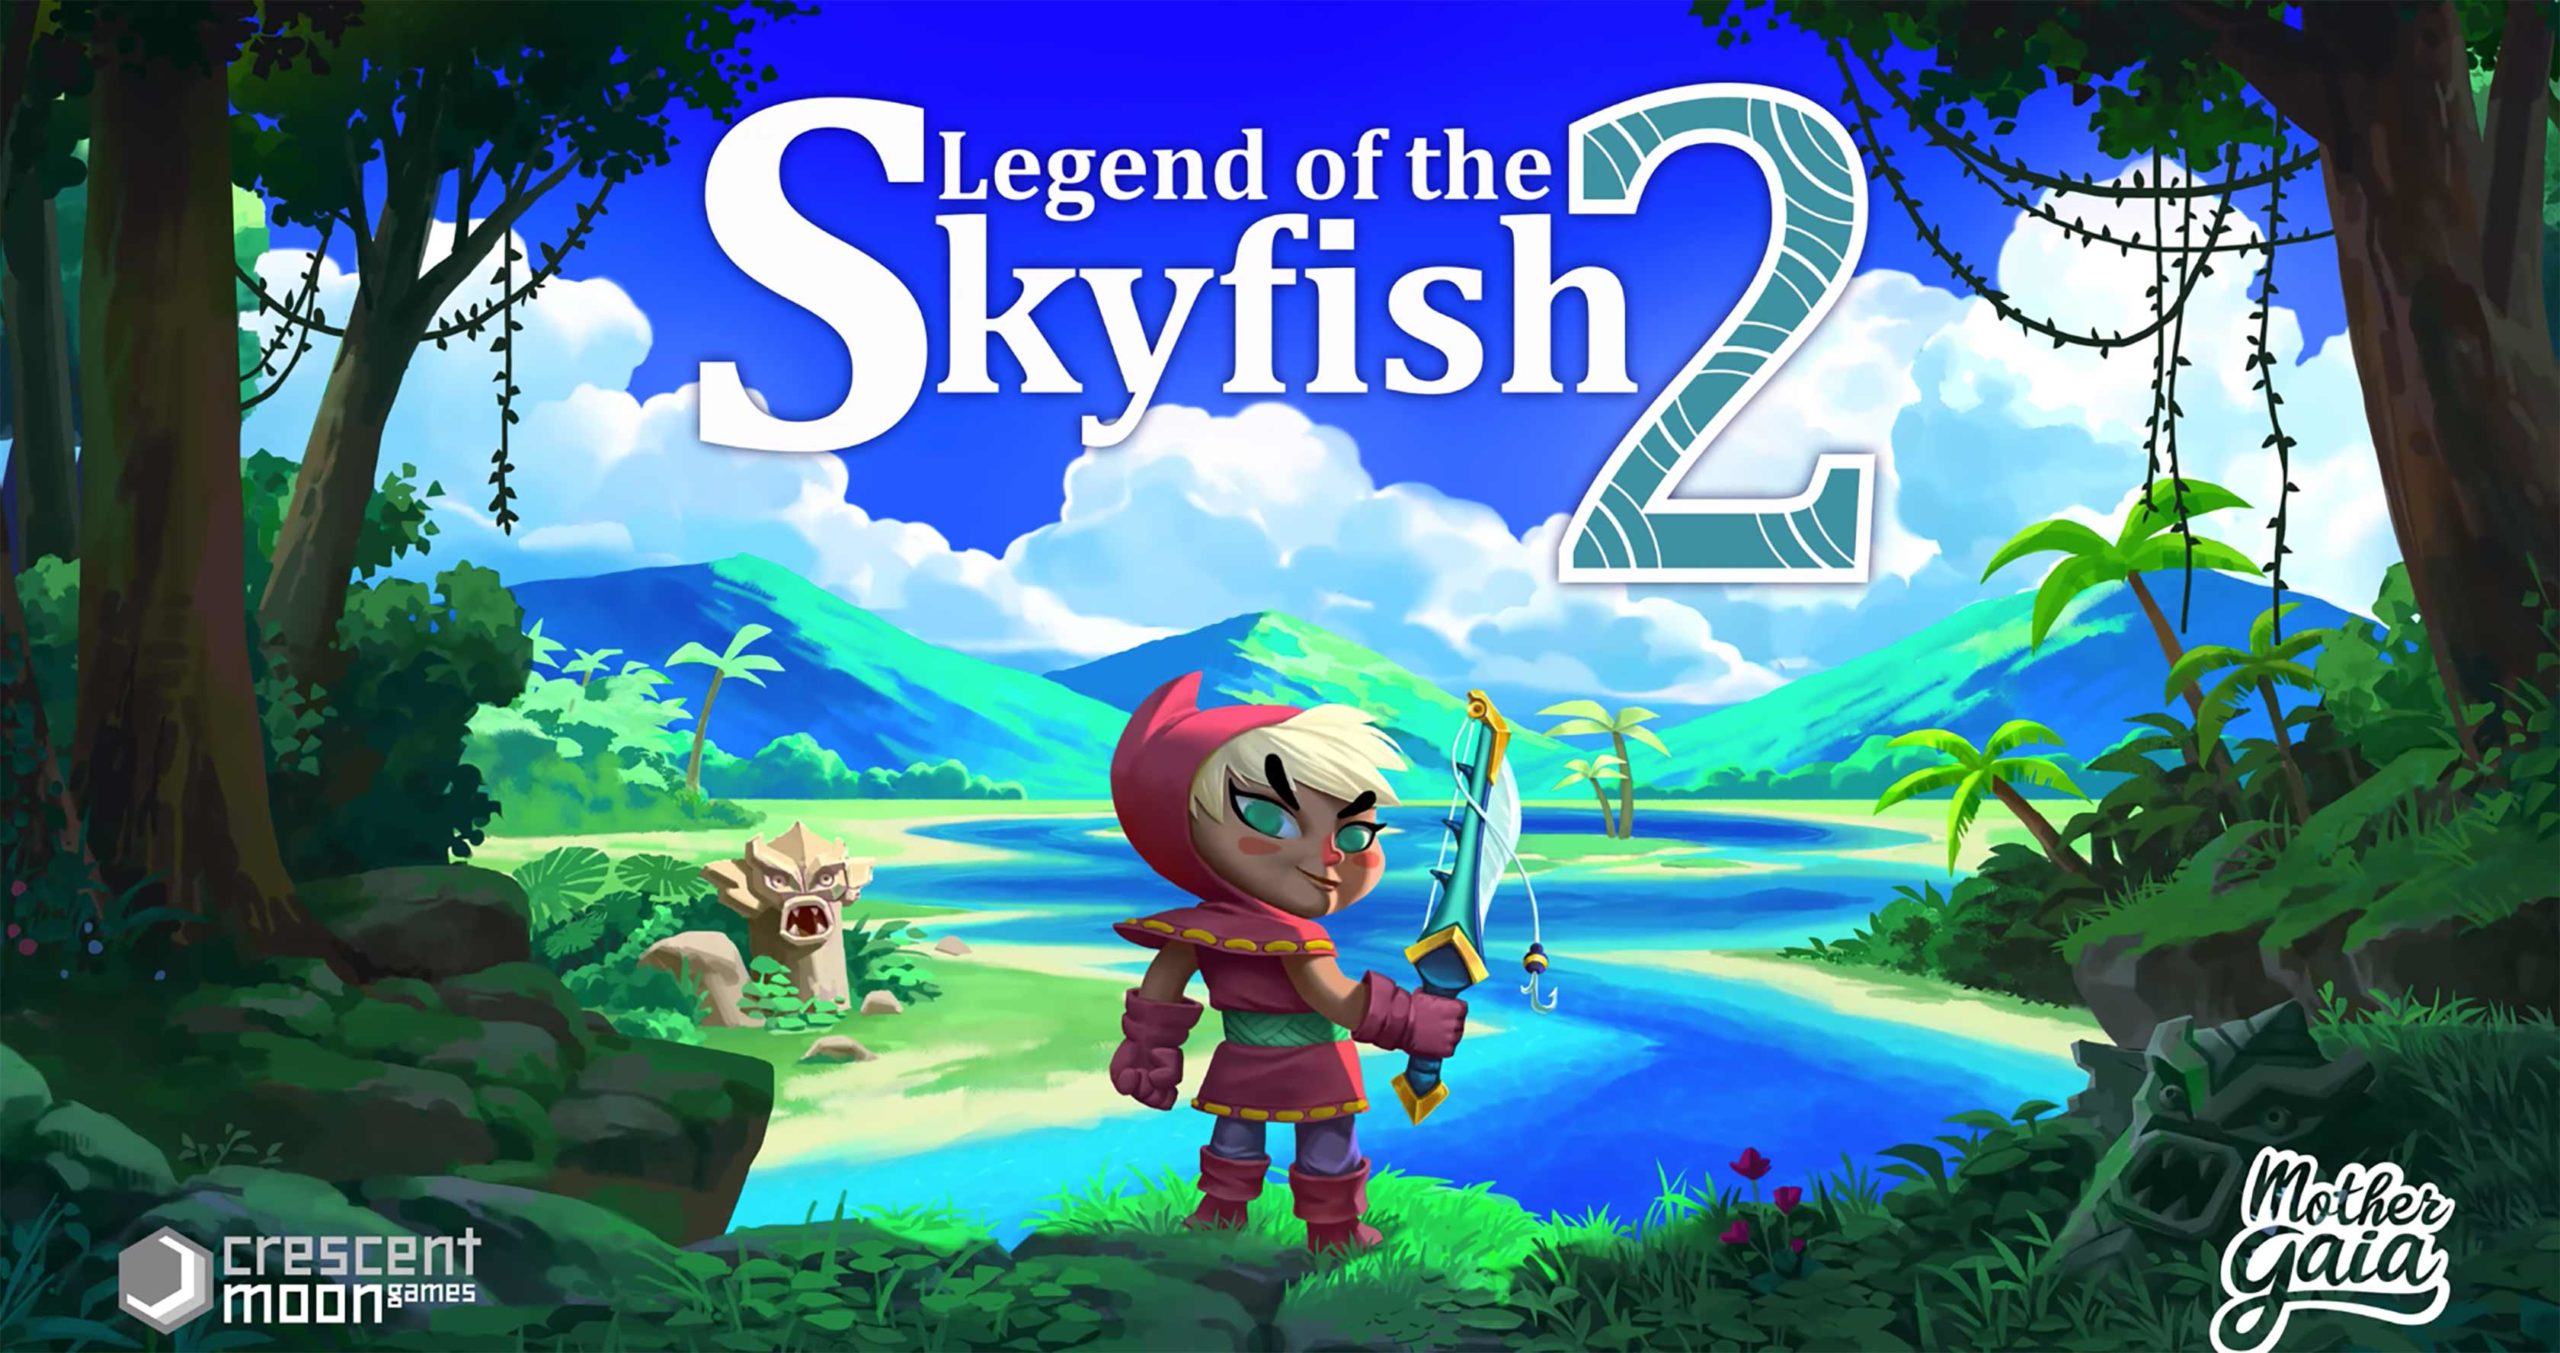 zelda-like-rpg-legend-of-the-skyfish-2-launches-on-apple-arcade